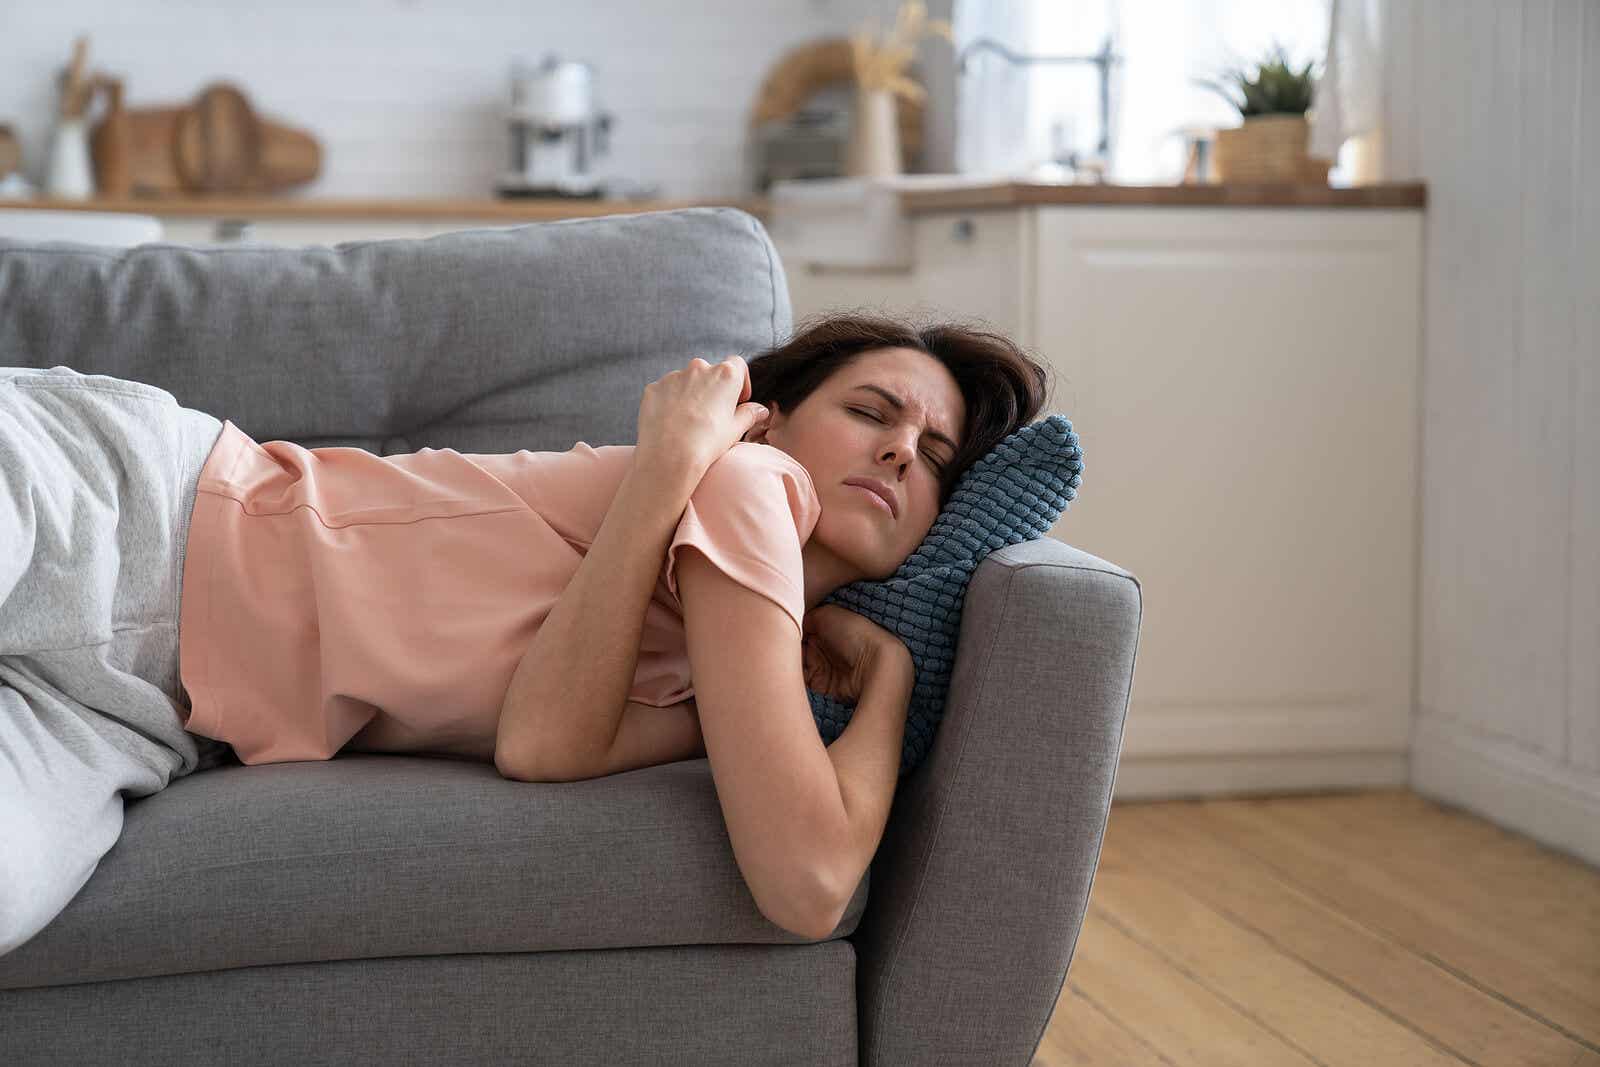 A woman taking a nap on the couch, looking uncomfortable.